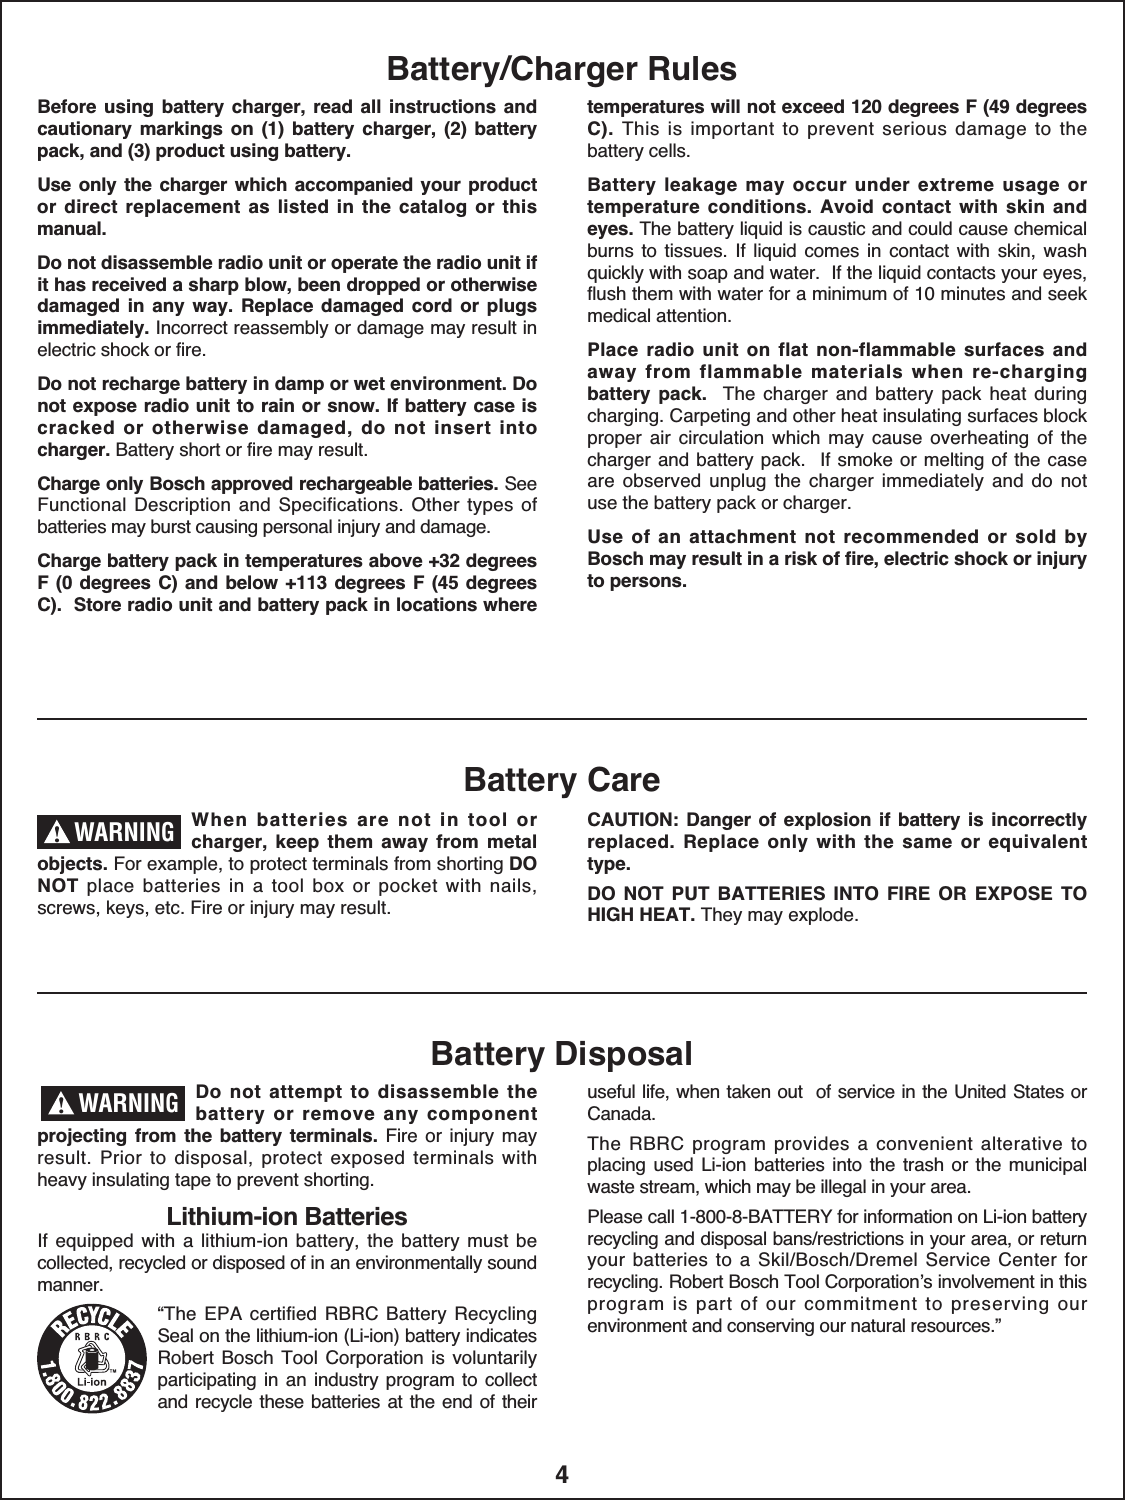 4Battery/Charger RulesBefore  using  battery  charger, read all instructions andcautionary  markings  on  (1)  battery  charger,  (2)  batterypack, and (3) product using battery.Use only the  charger which accompanied your productor  direct  replacement  as  listed  in  the  catalog  or thismanual.Do not disassemble radio unit or operate the radio unit ifit has received a sharp blow, been dropped or otherwisedamaged  in  any  way.  Replace  damaged  cord  or  plugsimmediately. Incorrect reassembly or damage may result inelectric shock or fire.Do not recharge battery in damp or wet environment. Donot expose radio unit to rain or snow. If battery case iscracked  or  otherwise damaged,  do  not  insert  intocharger. Battery short or fire may result. Charge only Bosch approved rechargeable batteries. SeeFunctional Description and Specifications. Other types  ofbatteries may burst causing personal injury and damage.Charge battery pack in temperatures above +32 degreesF (0  degrees C) and below +113 degrees F (45  degreesC).  Store radio unit and battery pack in locations wheretemperatures will not exceed 120 degrees F (49 degreesC). This  is  important  to prevent  serious  damage  to  thebattery cells.Battery  leakage  may  occur  under  extreme  usage  ortemperature  conditions.  Avoid  contact  with  skin  andeyes. The battery liquid is caustic and could cause chemicalburns to tissues.  If liquid comes  in  contact with  skin,  washquickly with soap and water.  If the liquid contacts your eyes,flush them with water for a minimum of 10 minutes and seekmedical attention.Place  radio  unit  on  flat  non-flammable  surfaces  andaway  from  flammable  materials  when  re-chargingbattery  pack. The  charger  and  battery  pack  heat  duringcharging. Carpeting and other heat insulating surfaces blockproper  air  circulation  which  may  cause  overheating  of  thecharger and battery pack.  If smoke  or melting of the caseare  observed unplug the charger immediately and do notuse the battery pack or charger.Use  of an  attachment  not  recommended  or  sold  byBosch may result in a risk of fire, electric shock or injuryto persons.When  batteries  are  not  in  tool  orcharger,  keep  them  away  from  metalobjects. For example, to protect terminals from shorting DONOT place  batteries  in  a  tool  box  or  pocket  with  nails,screws, keys, etc. Fire or injury may result. CAUTION:  Danger  of explosion if battery  is  incorrectlyreplaced.  Replace  only  with  the  same  or  equivalenttype.DO  NOT  PUT  BATTERIES  INTO  FIRE  OR  EXPOSE  TOHIGH HEAT. They may explode.Battery CareBattery DisposalDo  not  attempt  to  disassemble  thebattery  or  remove  any  com ponentprojecting from  the  battery  terminals. Fire or  injury  mayresult.  Prior to  disposal, protect  exposed  terminals  withheavy insulating tape to prevent shorting.Lithium-ion BatteriesIf equipped  with a lithium-ion  battery, the  battery must becollected, recycled or disposed of in an environ mentally soundmanner.“The EPA  certified  RBRC  Battery RecyclingSeal on the lithium-ion (Li-ion) battery indicatesRobert Bosch Tool  Corporation  is voluntarily participating in  an industry program to collectand recycle these batteries at the end of theiruseful life, when taken out  of service in the United States orCanada.The  RBRC  program provides  a convenient alterative toplacing used Li-ion batteries into the trash or  the munici palwaste stream, which may be illegal in your area.Please call 1-800-8-BATTERY for information on Li-ion batteryrecycling and disposal bans/restrictions in your area, or returnyour batteries  to  a  Skil/Bosch/Dremel Service  Center forrecycling. Robert Bosch Tool Corporation’s involvement in thisprogram  is part  of  our  commitment to  preserving ourenvironment and conserving our natural resources.” WARNING!WARNING!